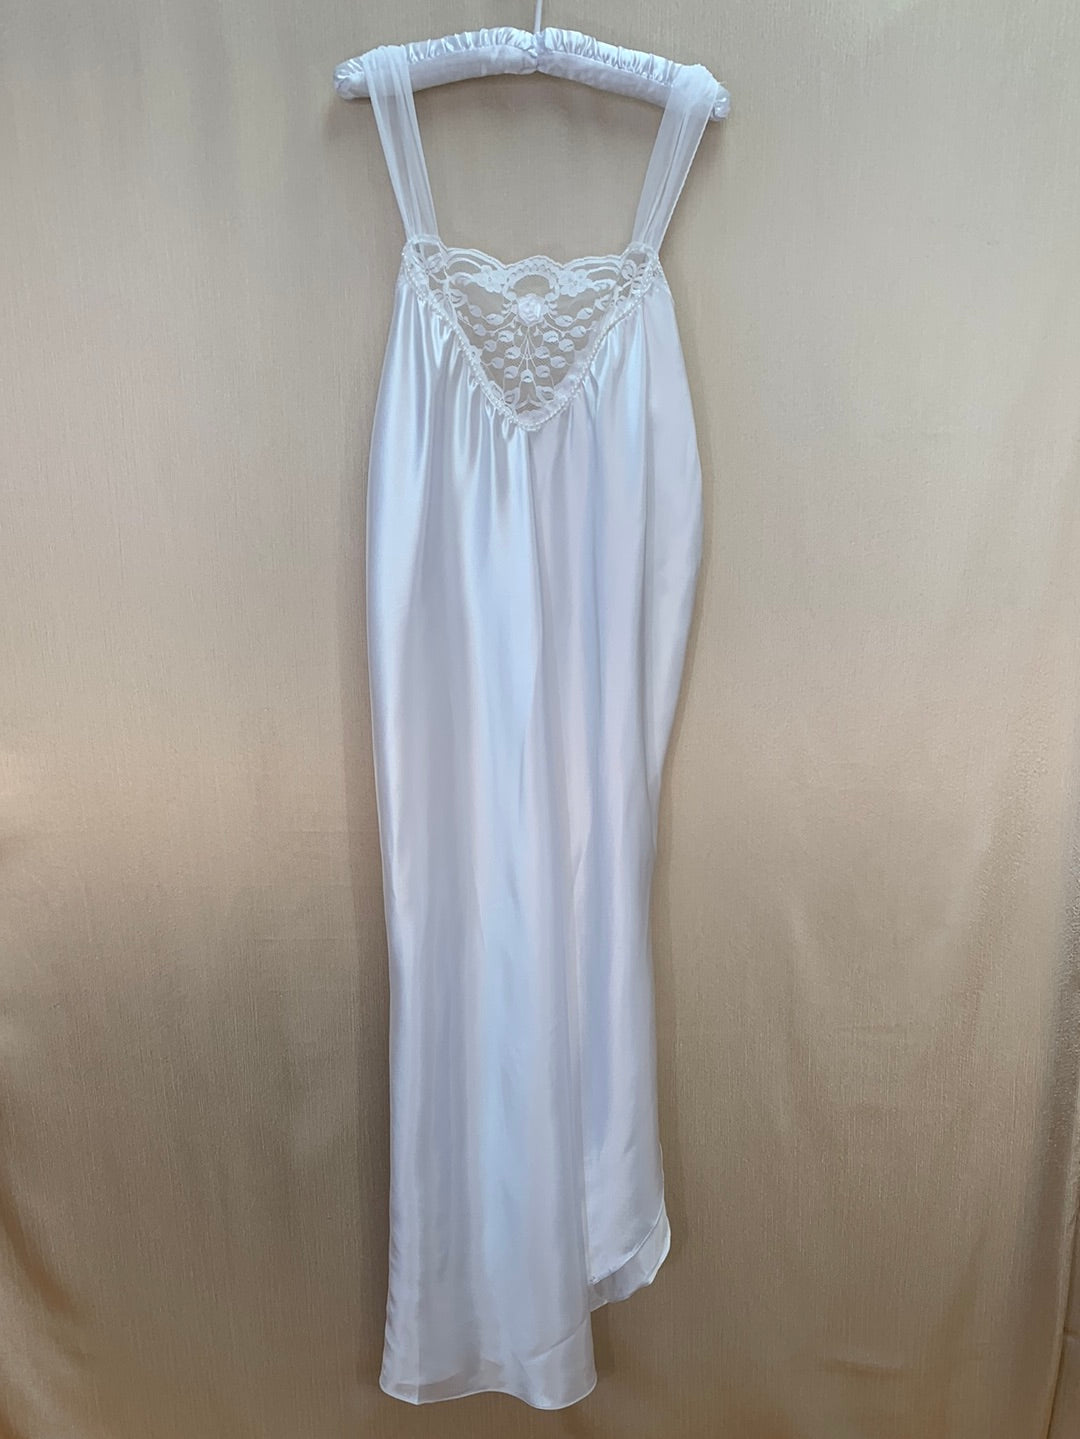 NWT VINTAGE - APPEL white Lace Satin Long Nightgown & Sheer Robe - L